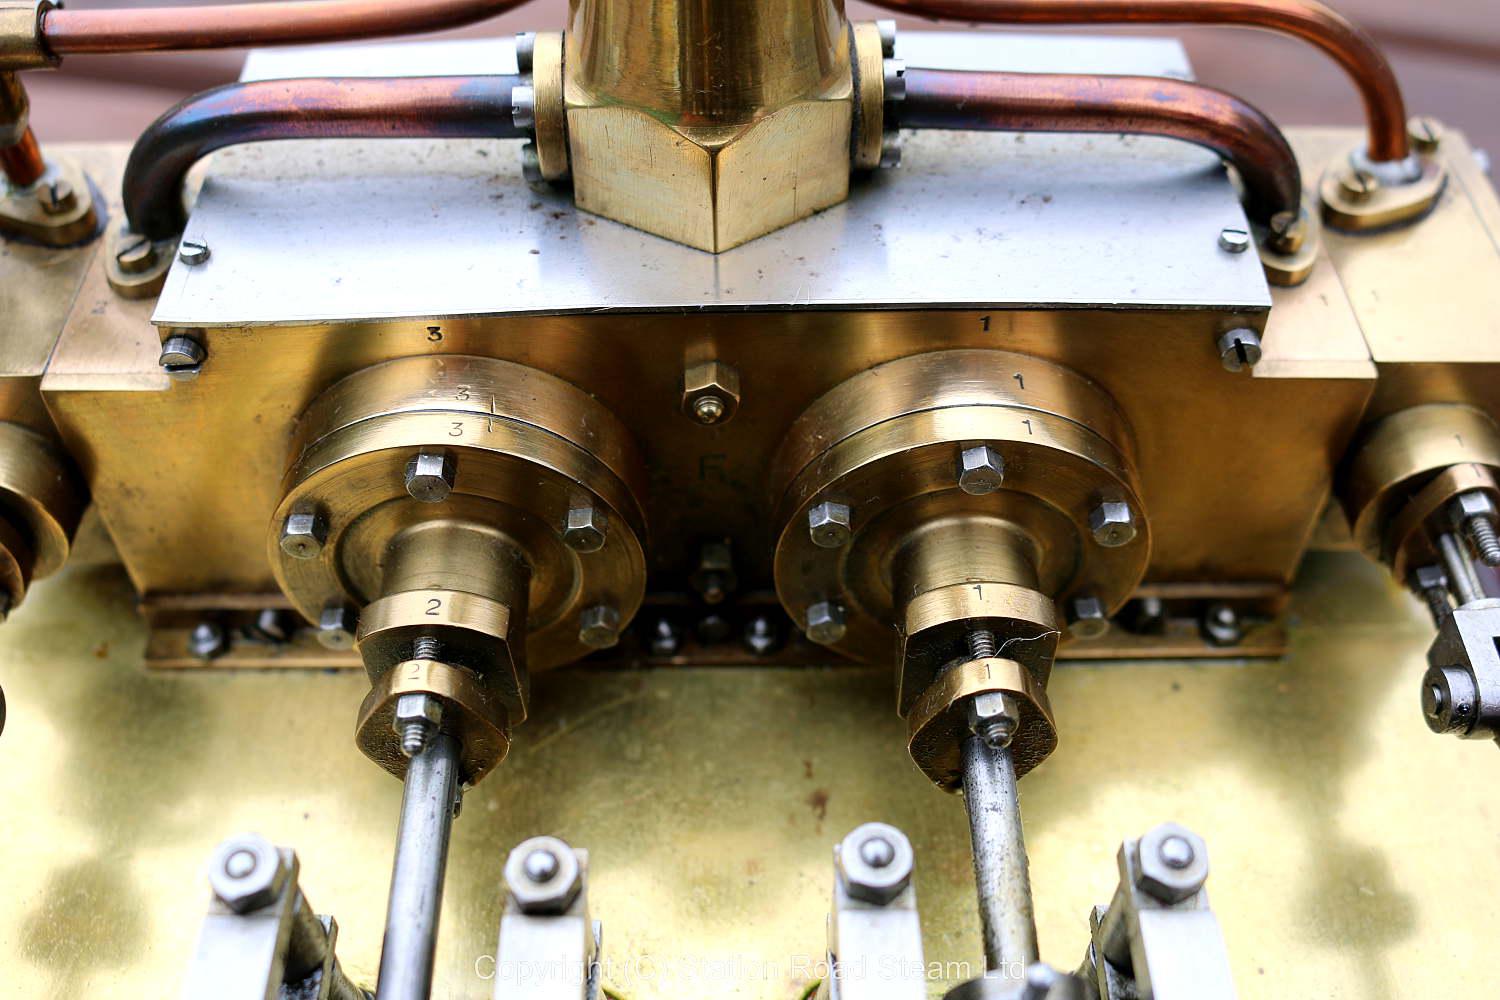 Horizontal twin mill engine on brass supports with hardwood base